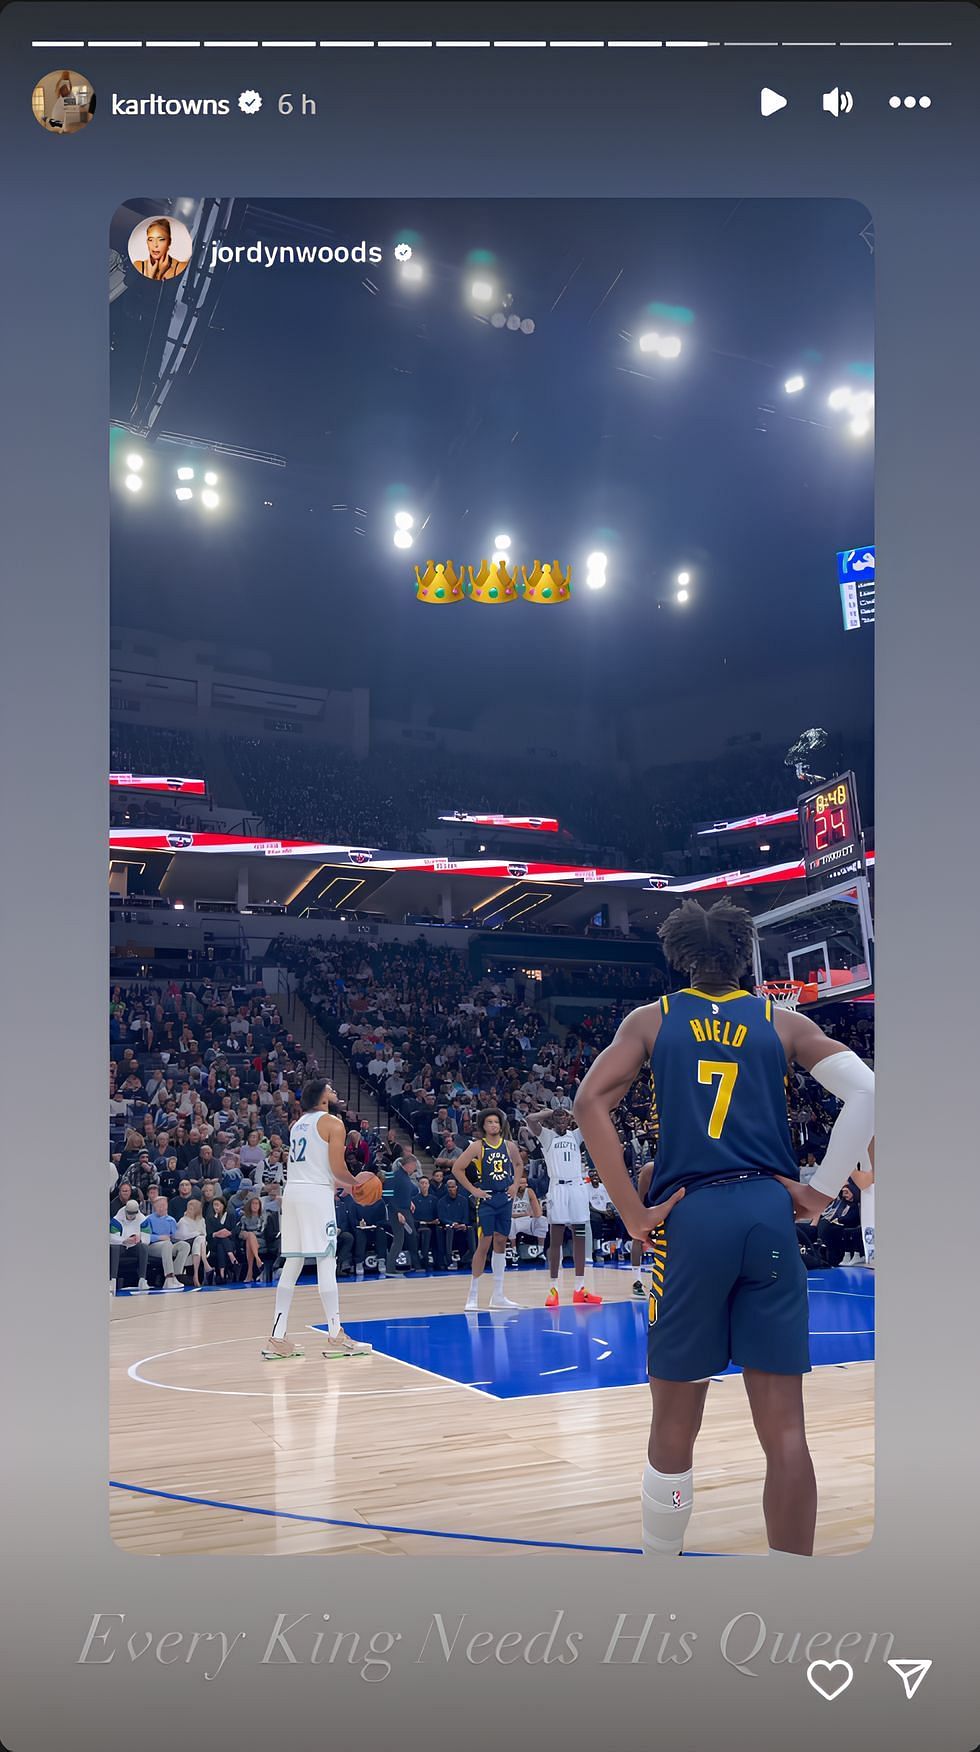 Karl-Anthony Towns: &quot;Every King Needs His Queen&quot;